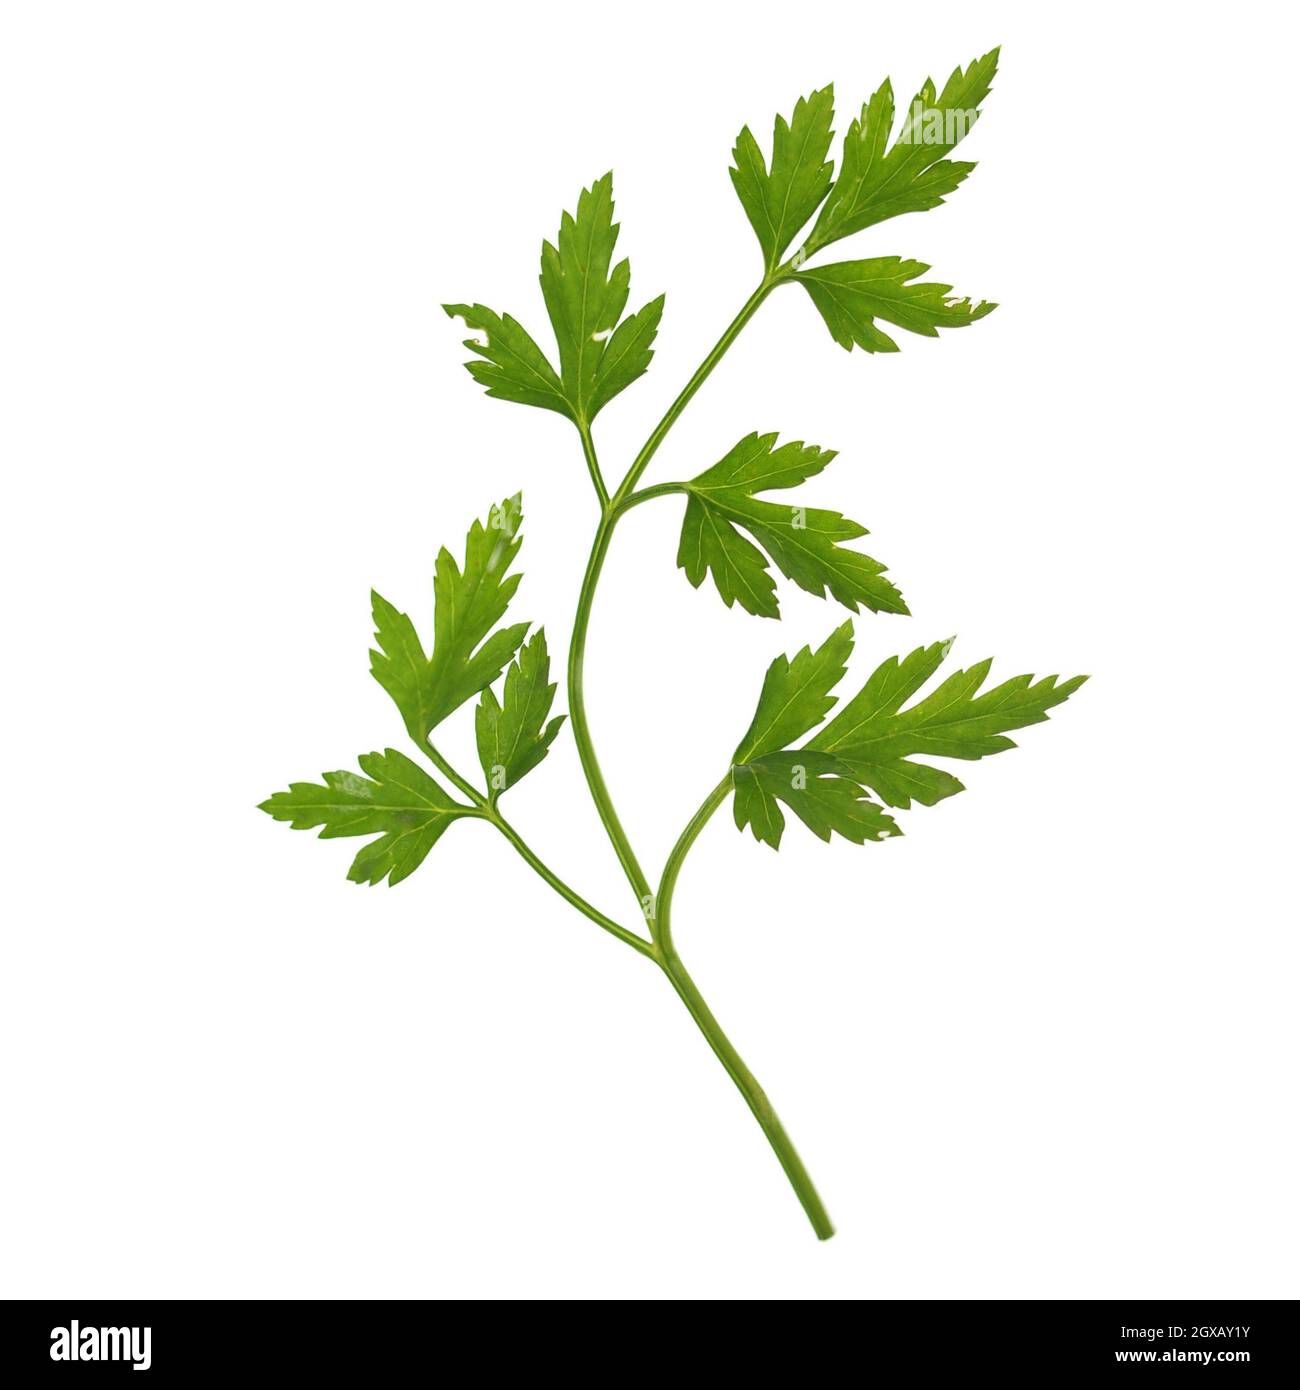 Parsley cilantro coriander plant useful as a spice isolated over white. Stock Photo